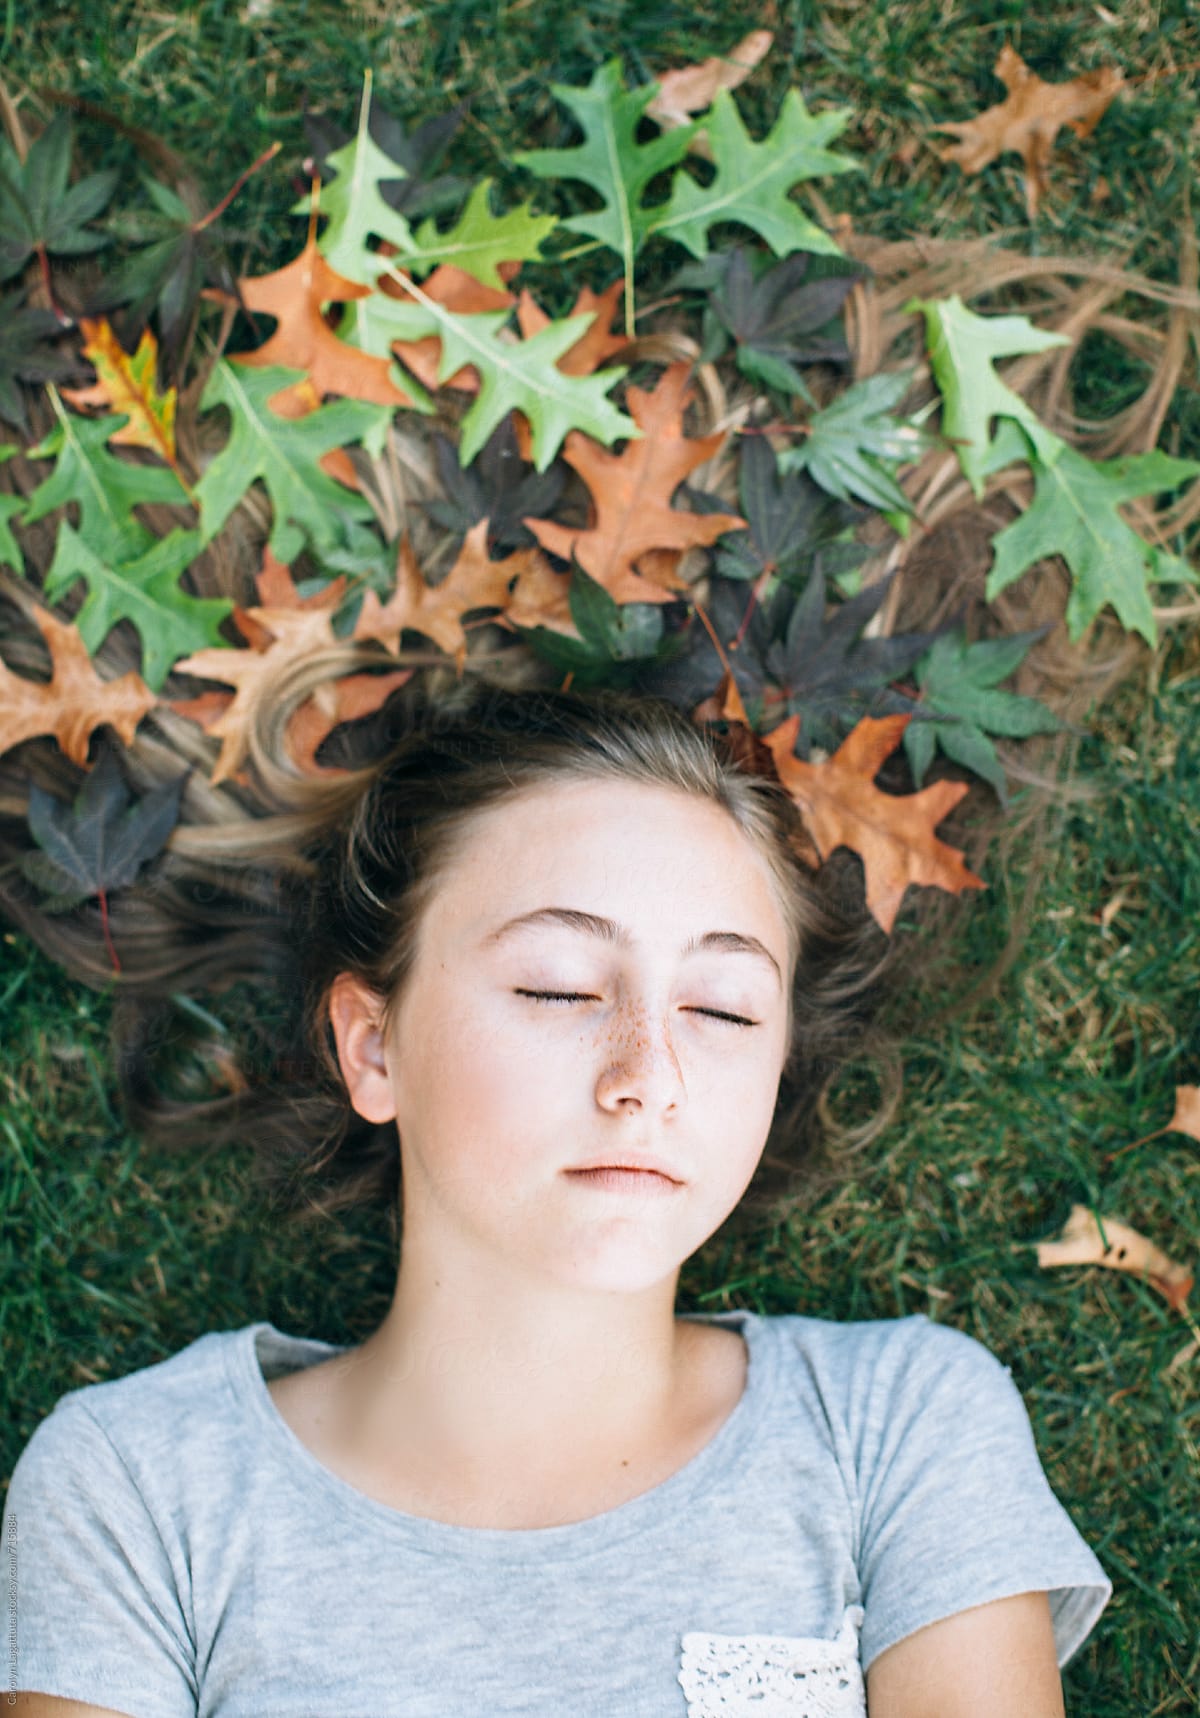 Teenage Girl Laying In The Grass With Her Long Hair Decorated With Fallen Leaves By Stocksy